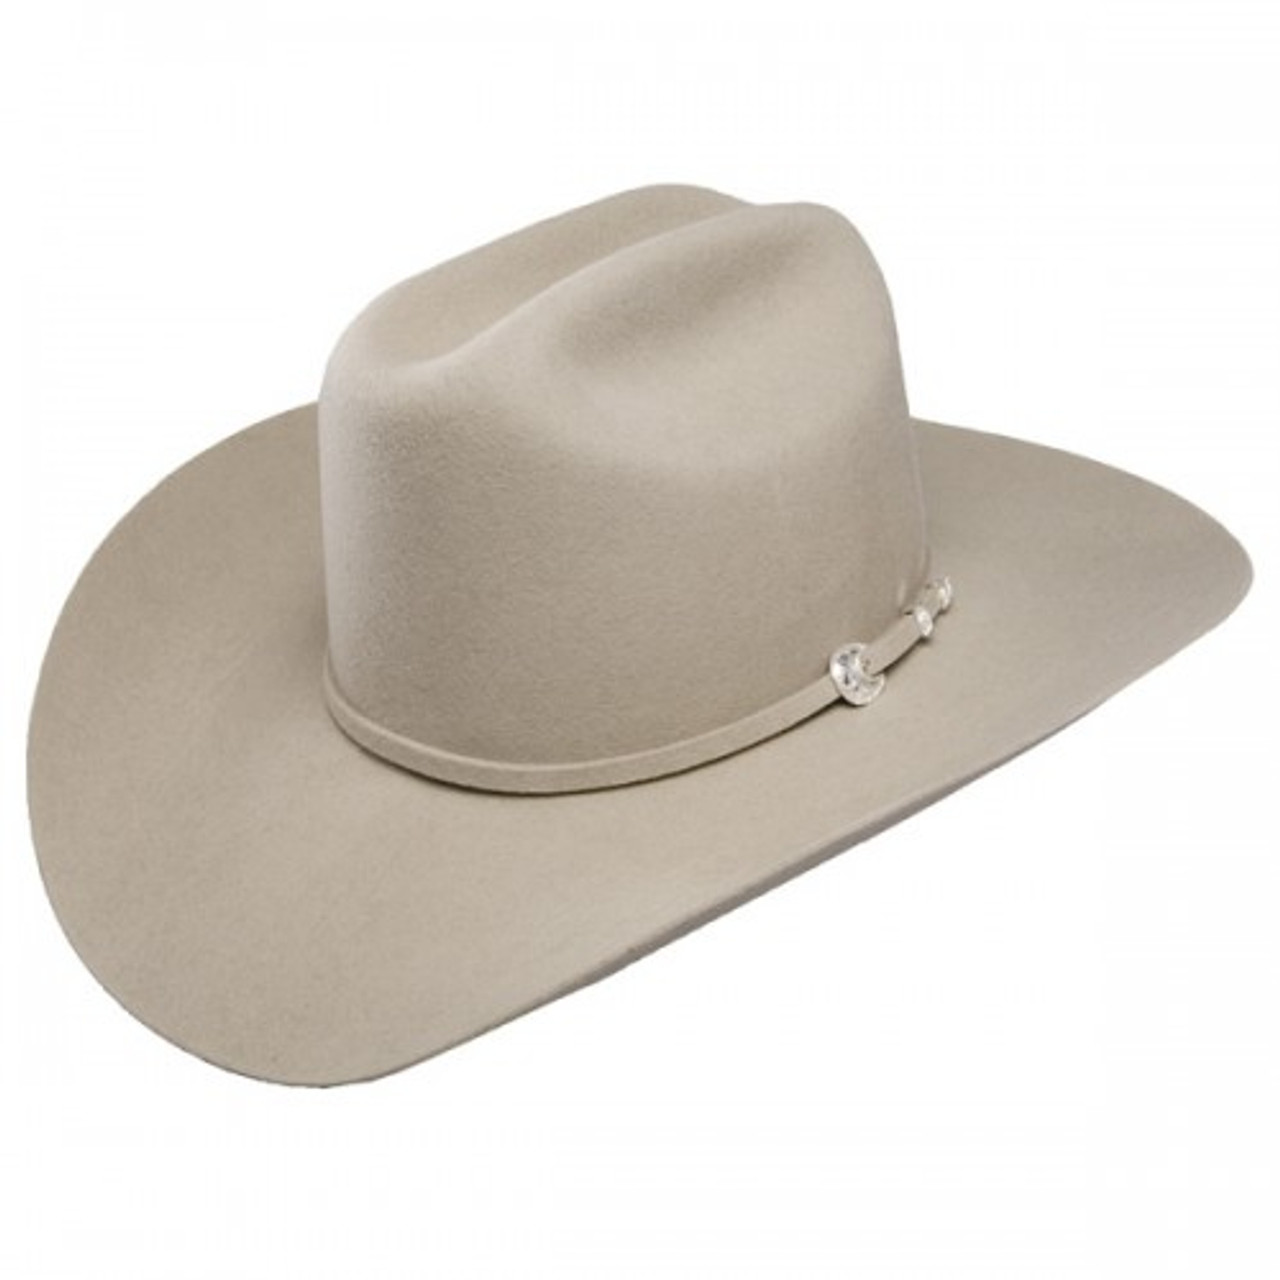 Stetson Felt Hats - Buffalo Collection - Corral - 4X - Silver - Billy's Western